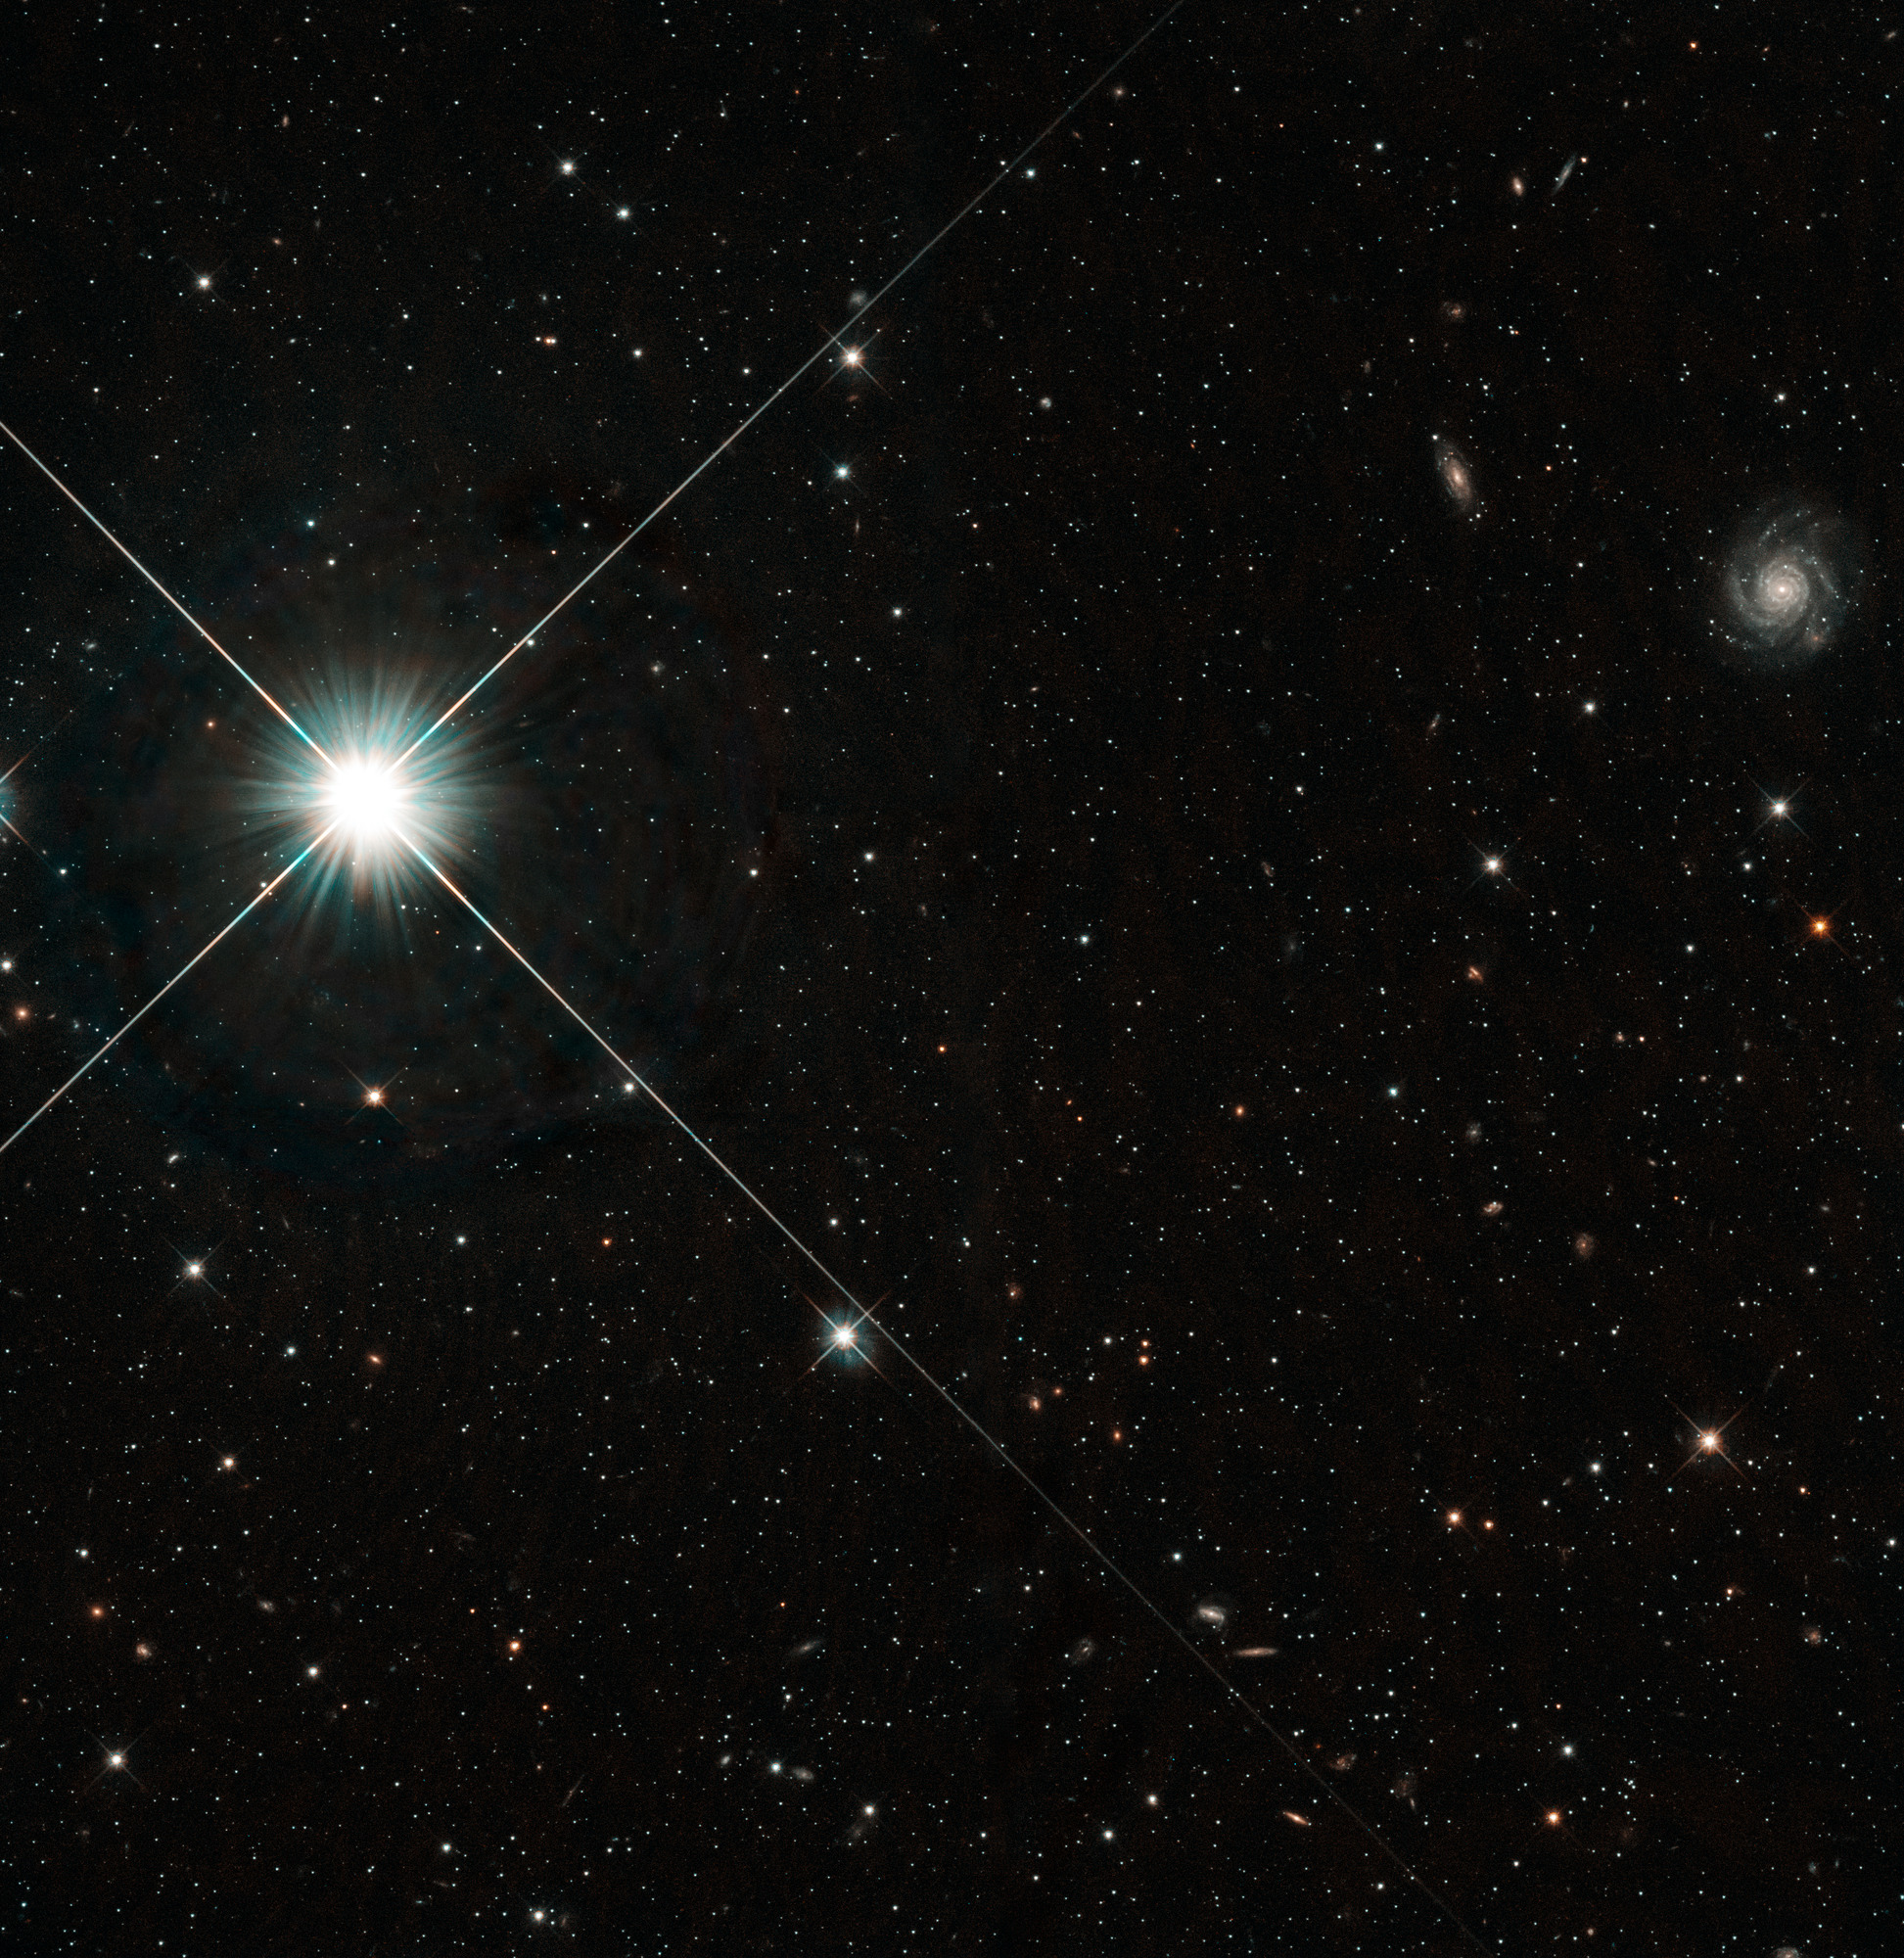 Distant and nearby galaxies dot an inky-black background. Bright foreground stars hold four diffraction spikes.